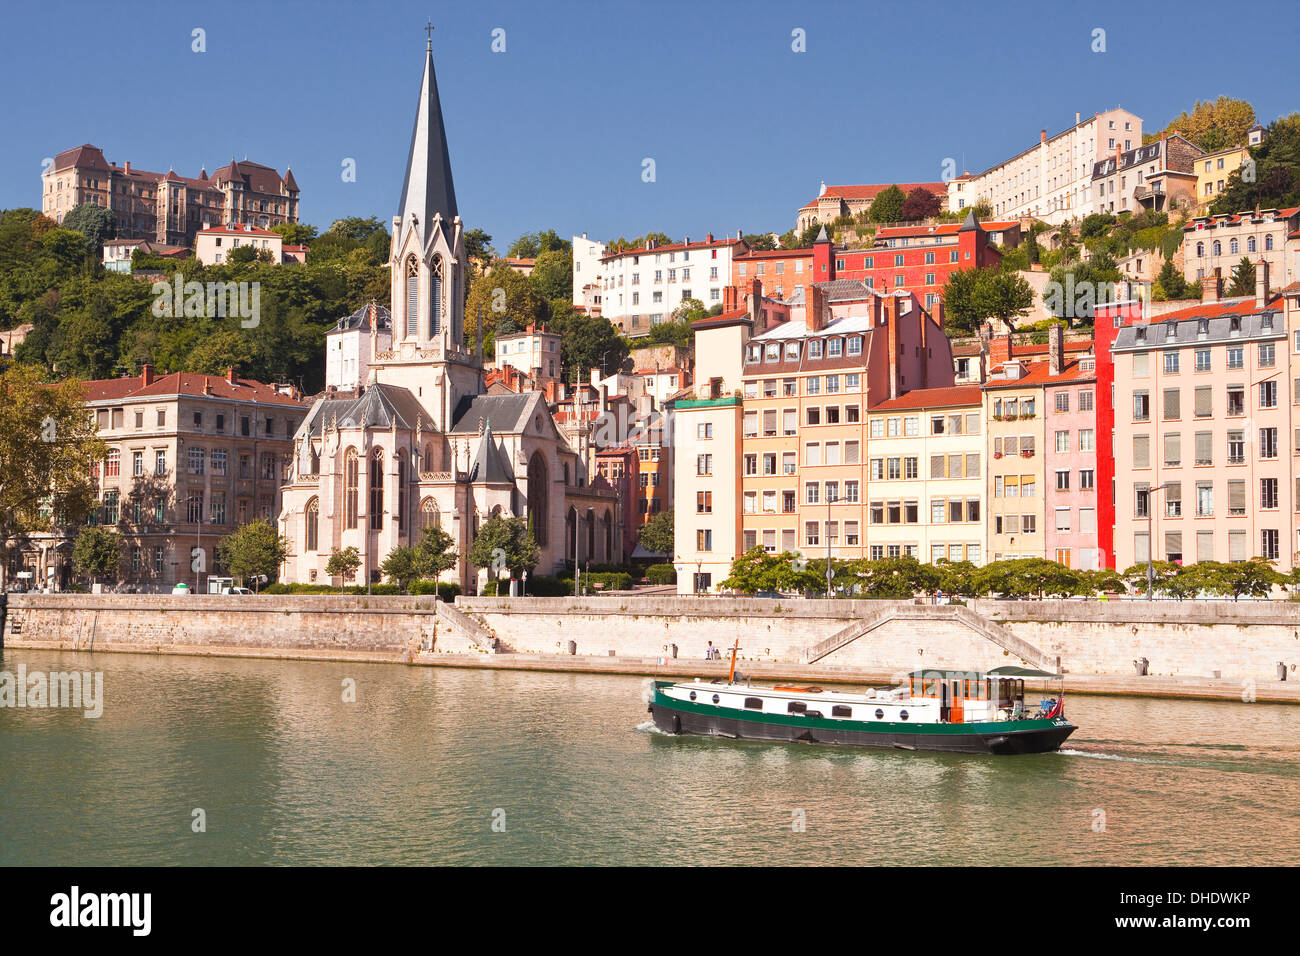 Eglise Saint George and Vieux Lyon on the banks of the River Saone, Lyon, Rhone, Rhone-Alpes, France, Europe Stock Photo